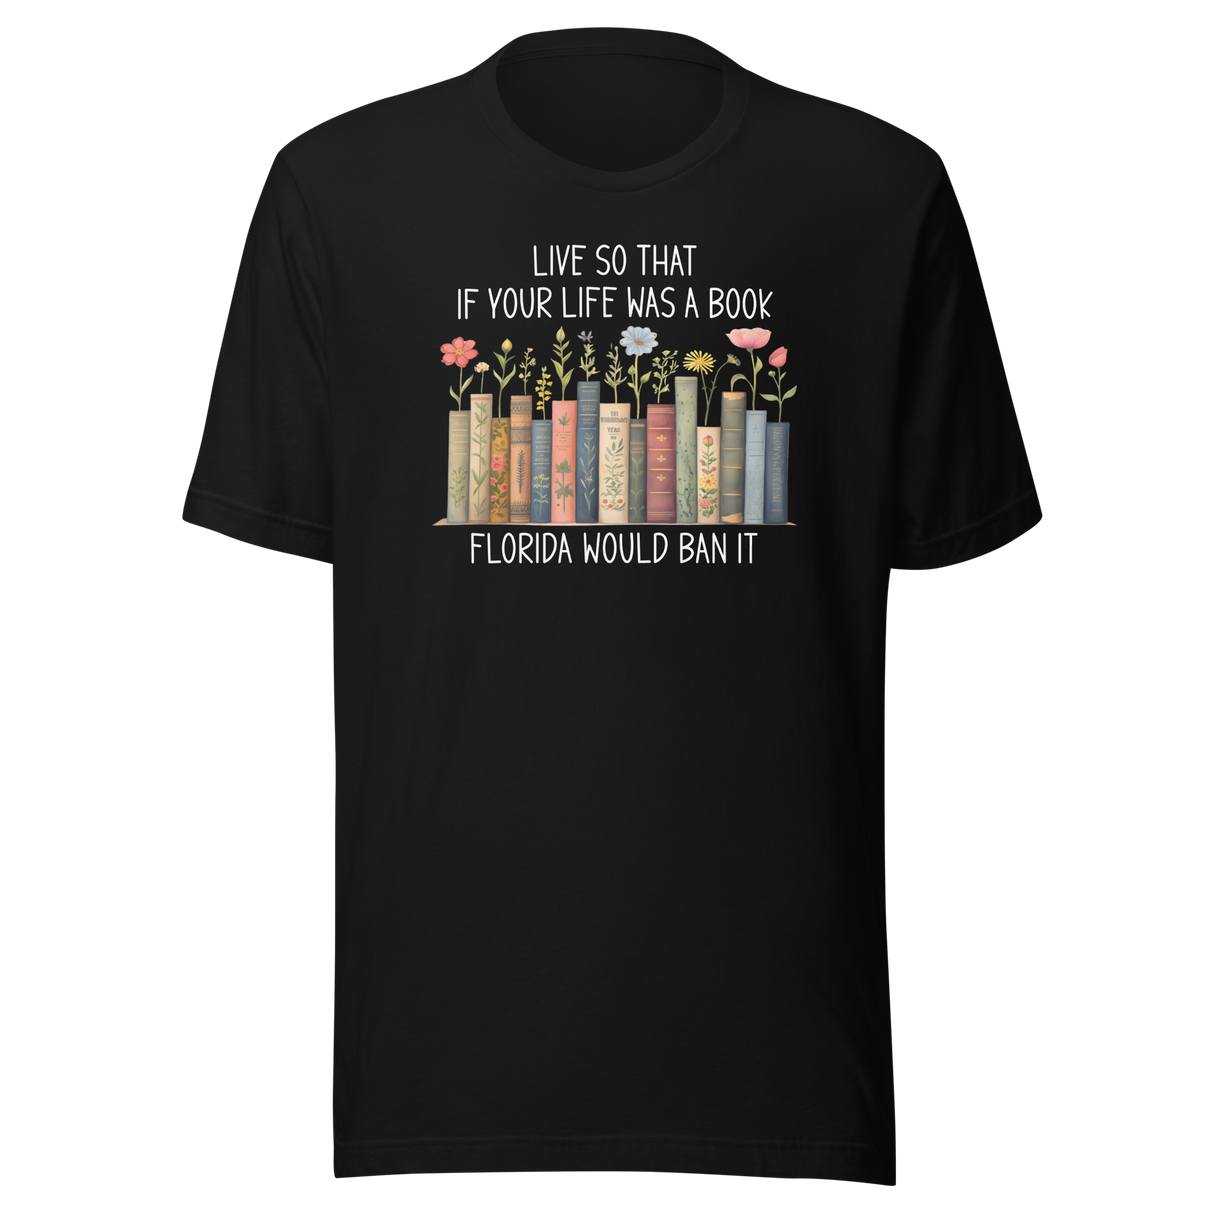 live-so-that-if-your-life-was-a-book-florida-would-ban-it-politics-tee-life-t-shirt-politics-tee-ban-t-shirt-satire-tee#color_black